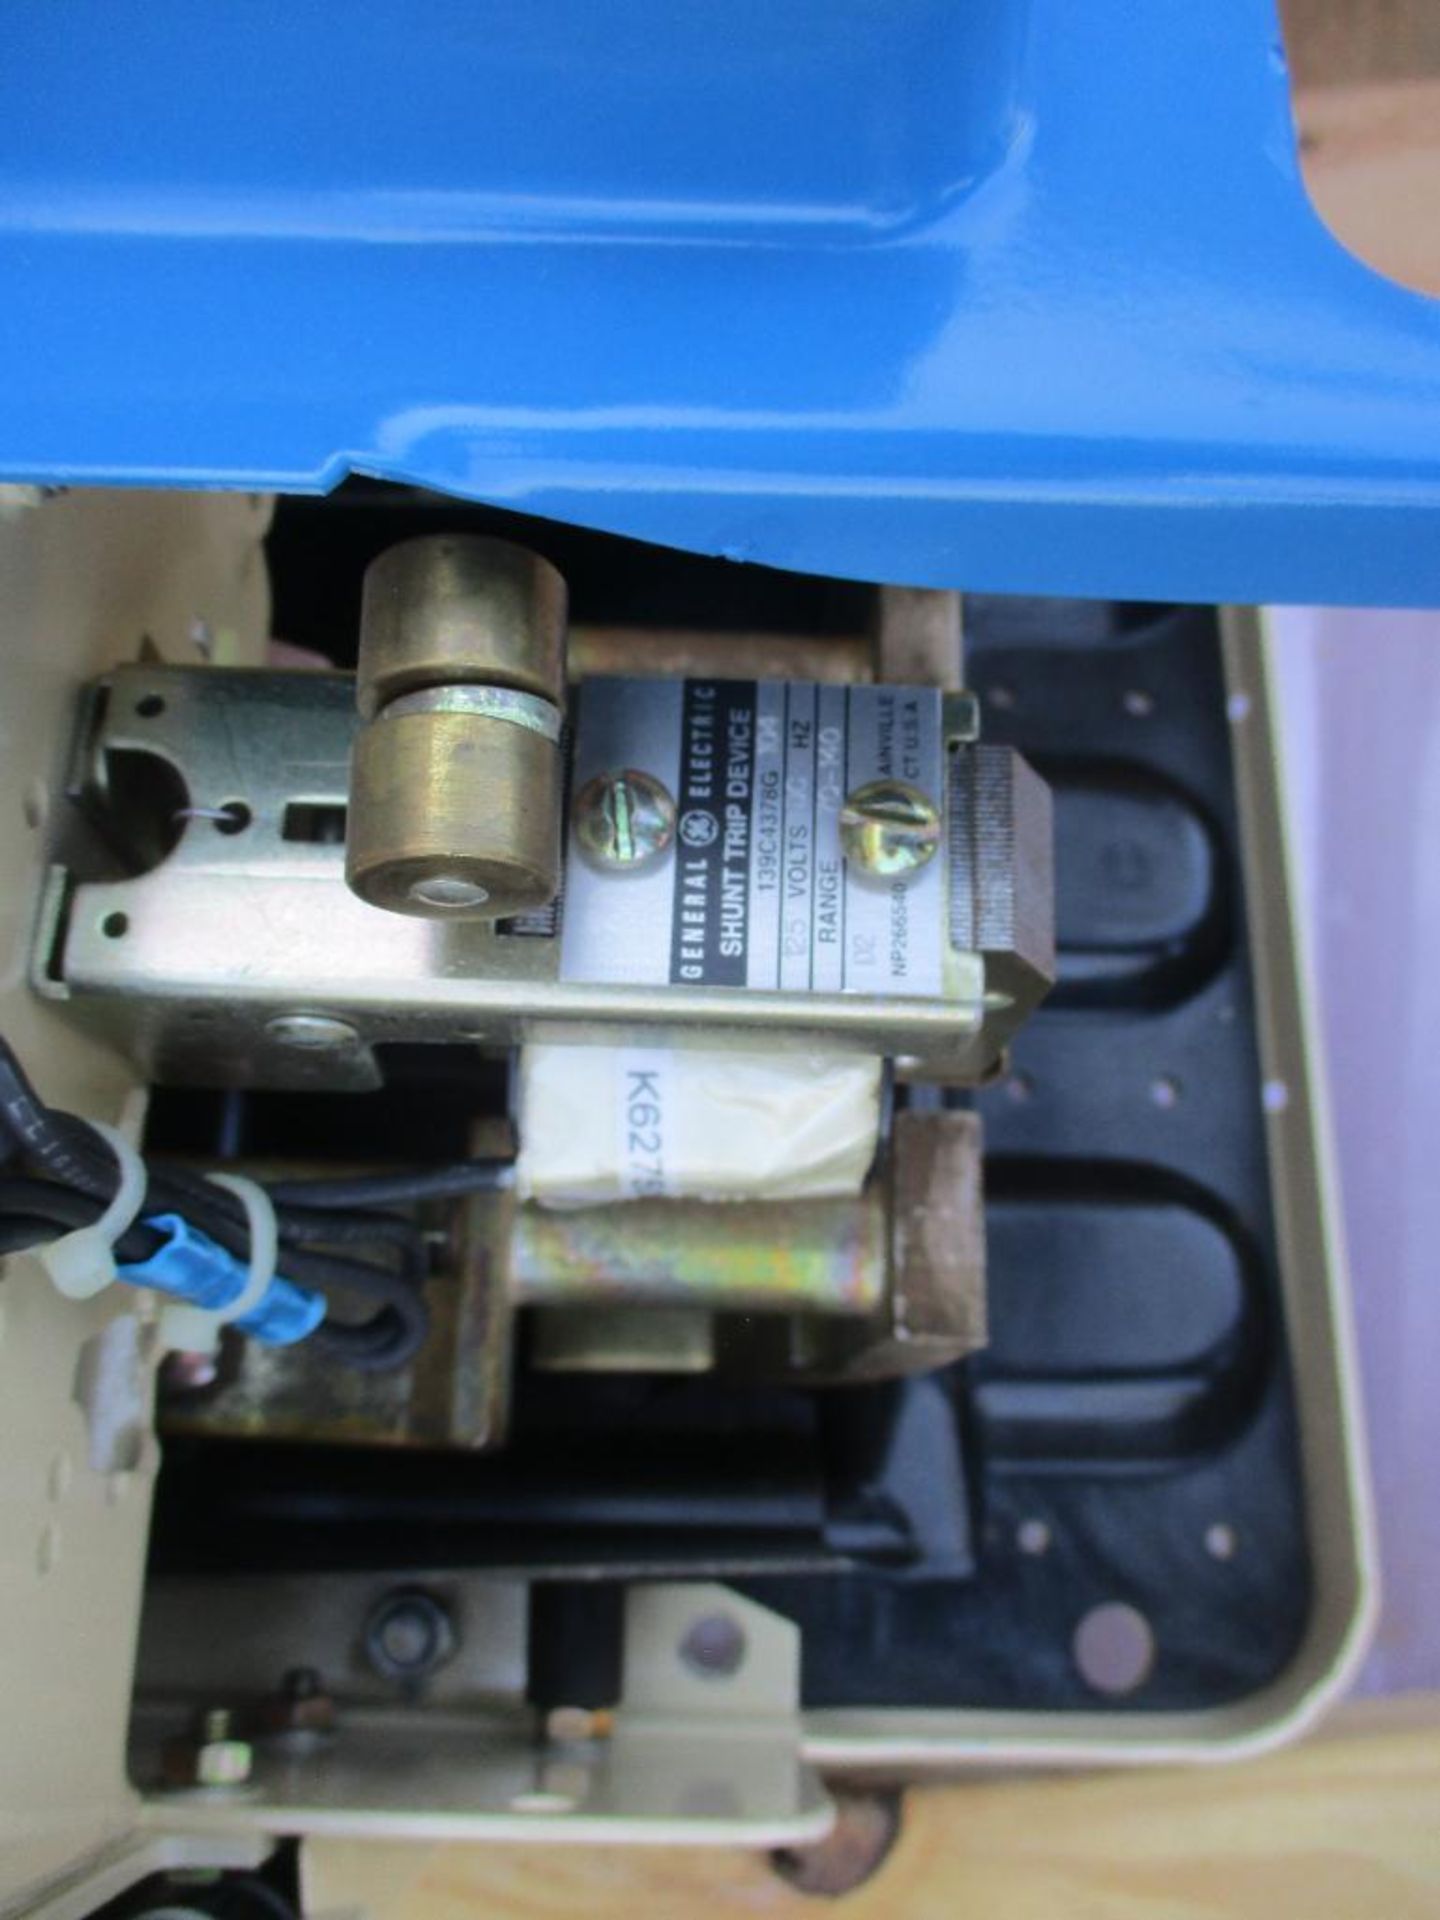 GENERAL ELECTRIC LOW VOLTAGE POWER CIRCUIT BREAKERS (1) AK2A-25-1 NO 209A1555-301 MF 3 POLE 600AMP A - Image 5 of 12